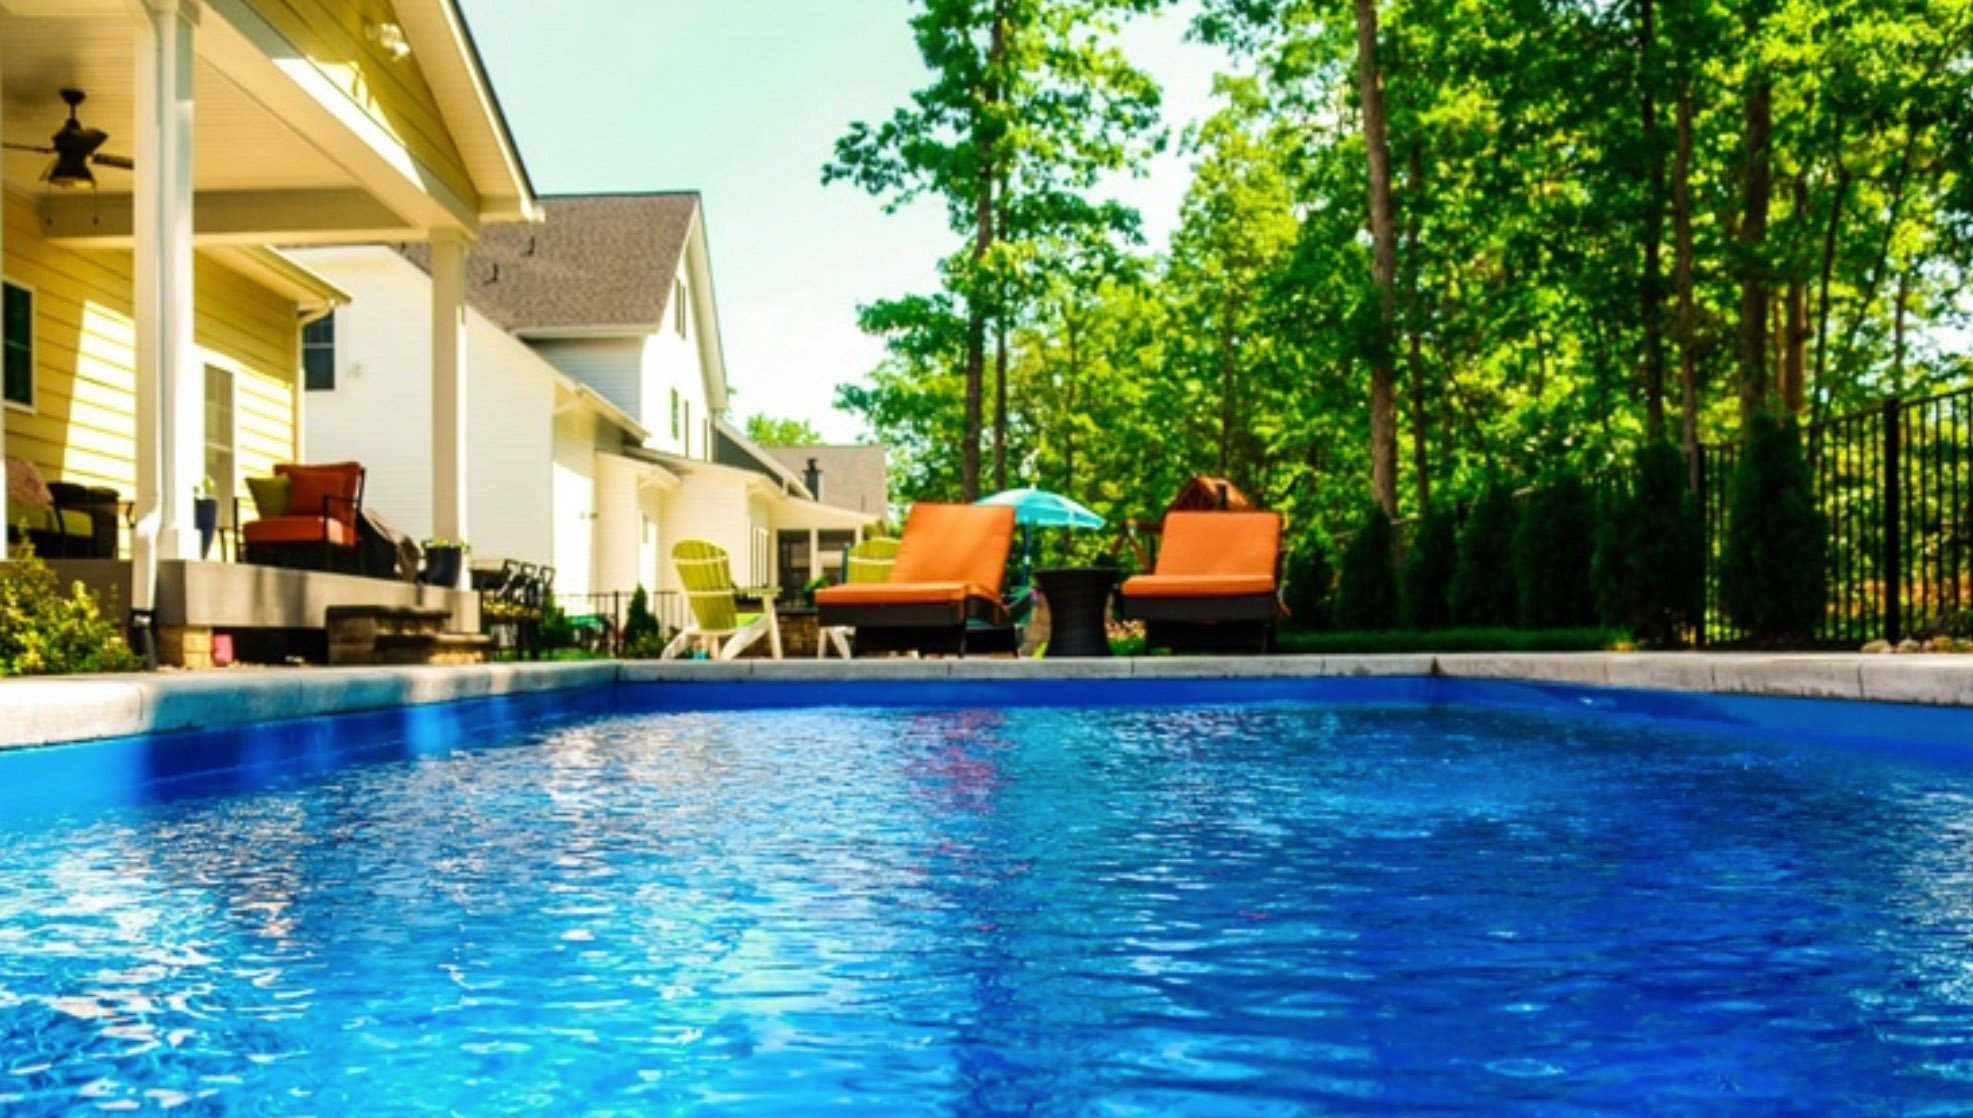 How to Get a Pool Fast and Cheap by Summer